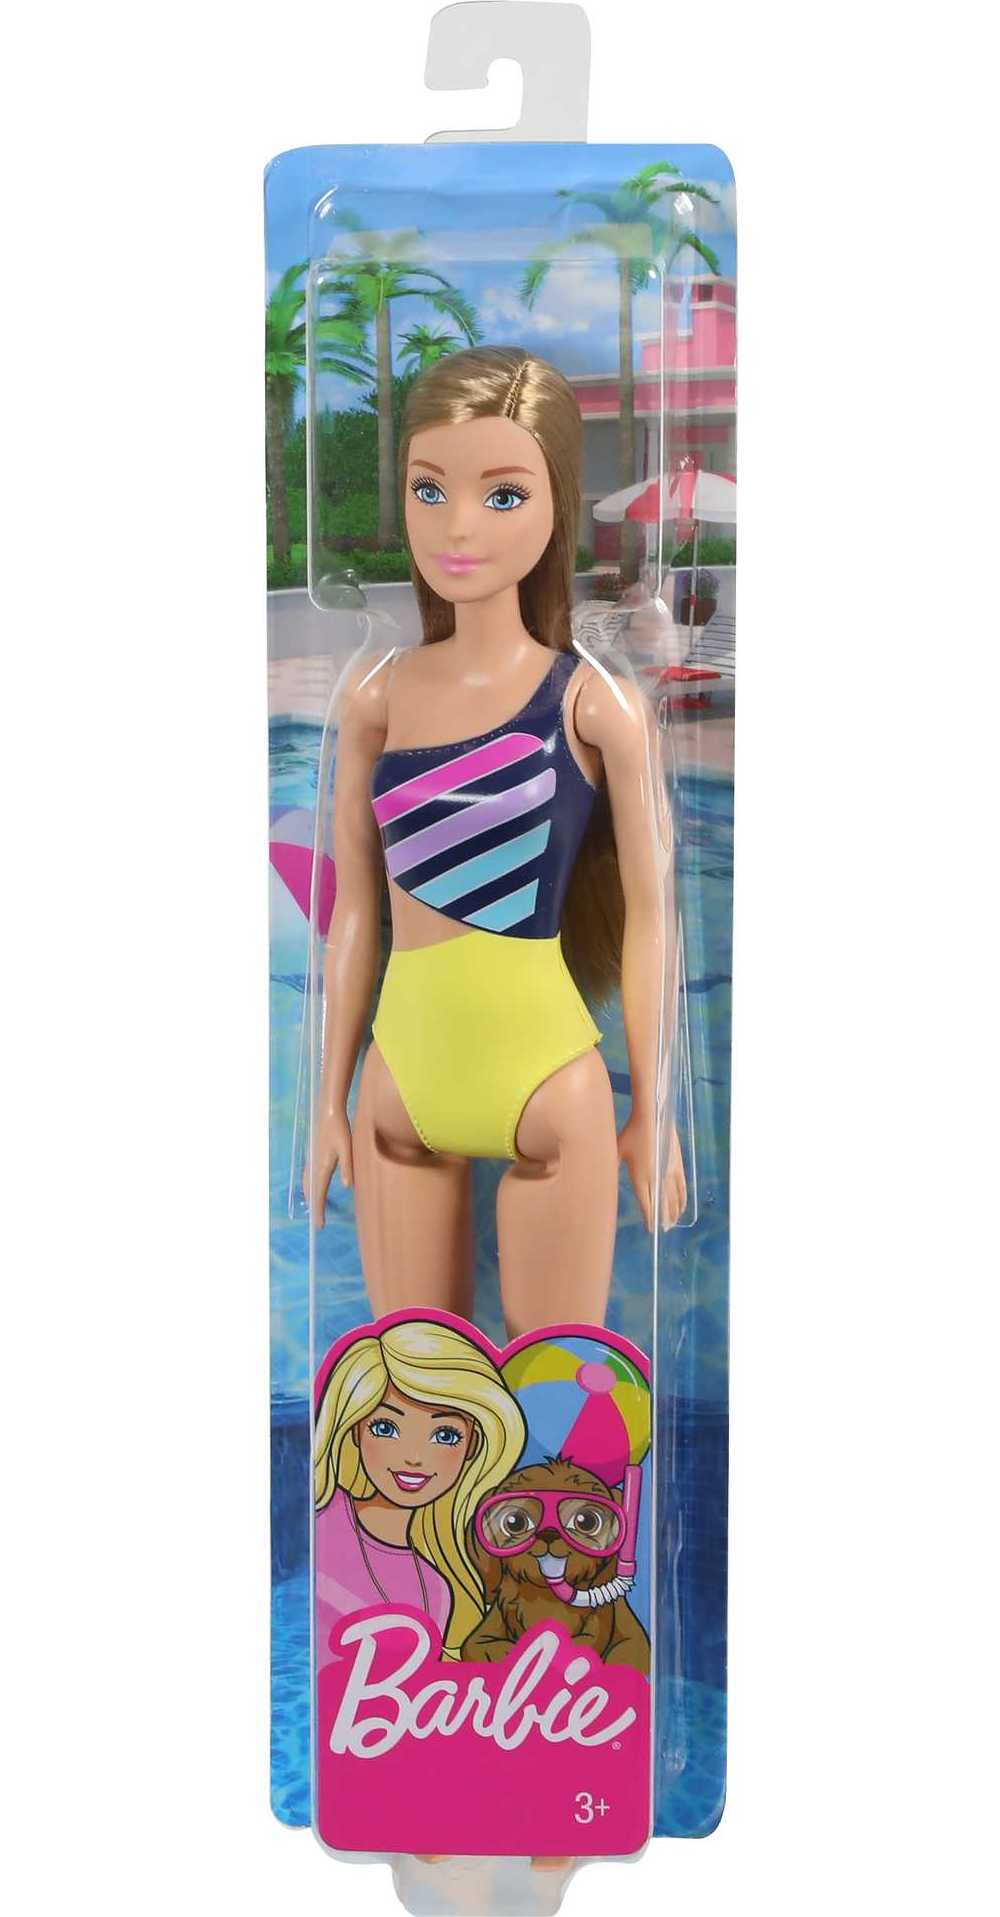 Barbie Swimsuit Beach Doll with Blonde Hair & Striped Suit - image 6 of 6